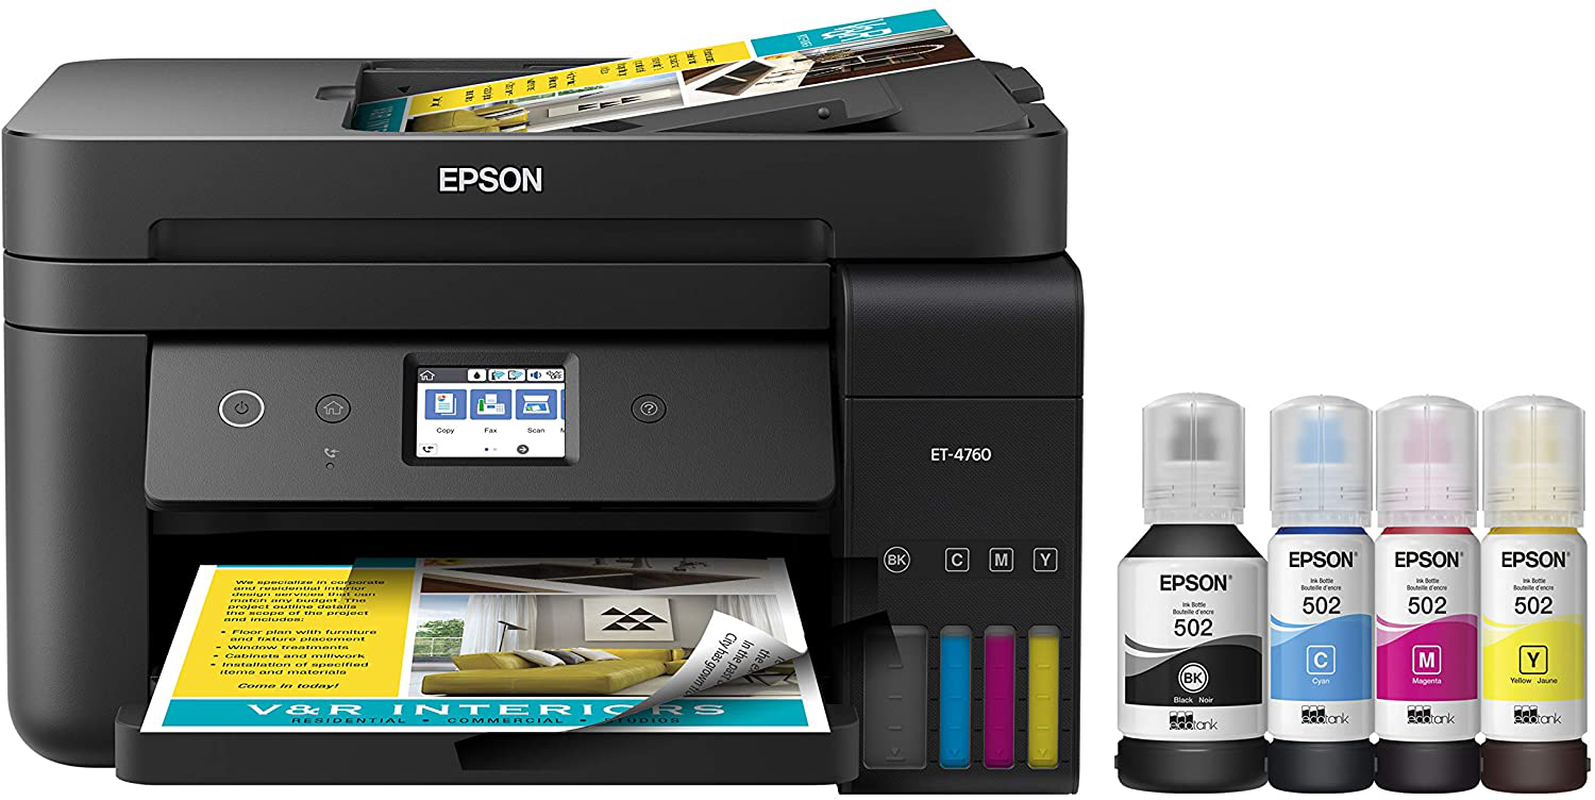 Epson Ecotank Et 2760 Wireless Color All In One Cartridge Free Supertank Printer With Scanner 8583